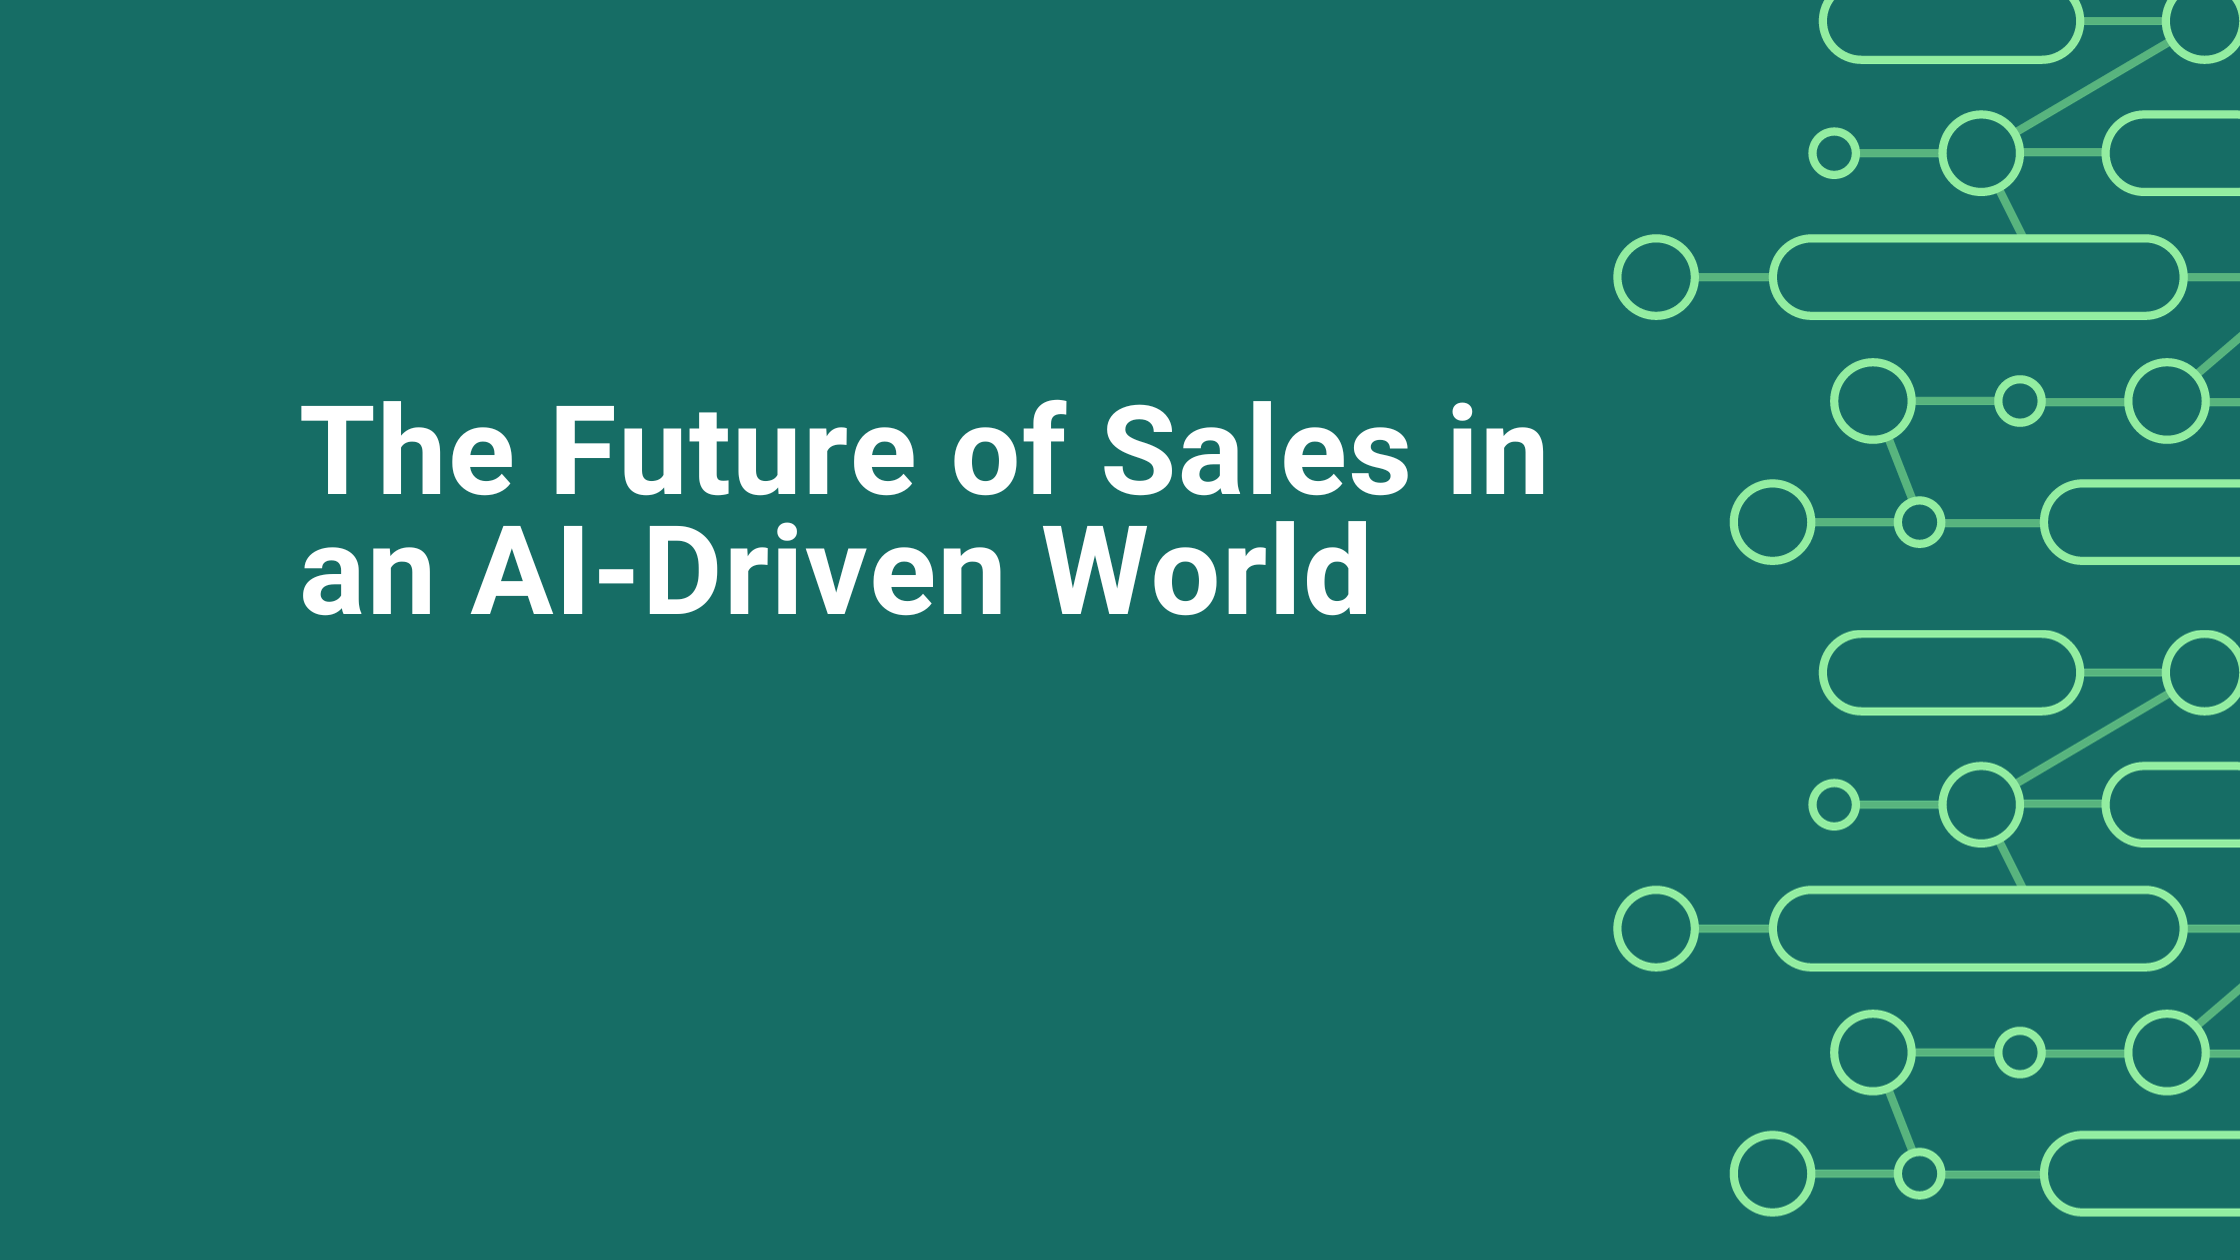 The future of sales